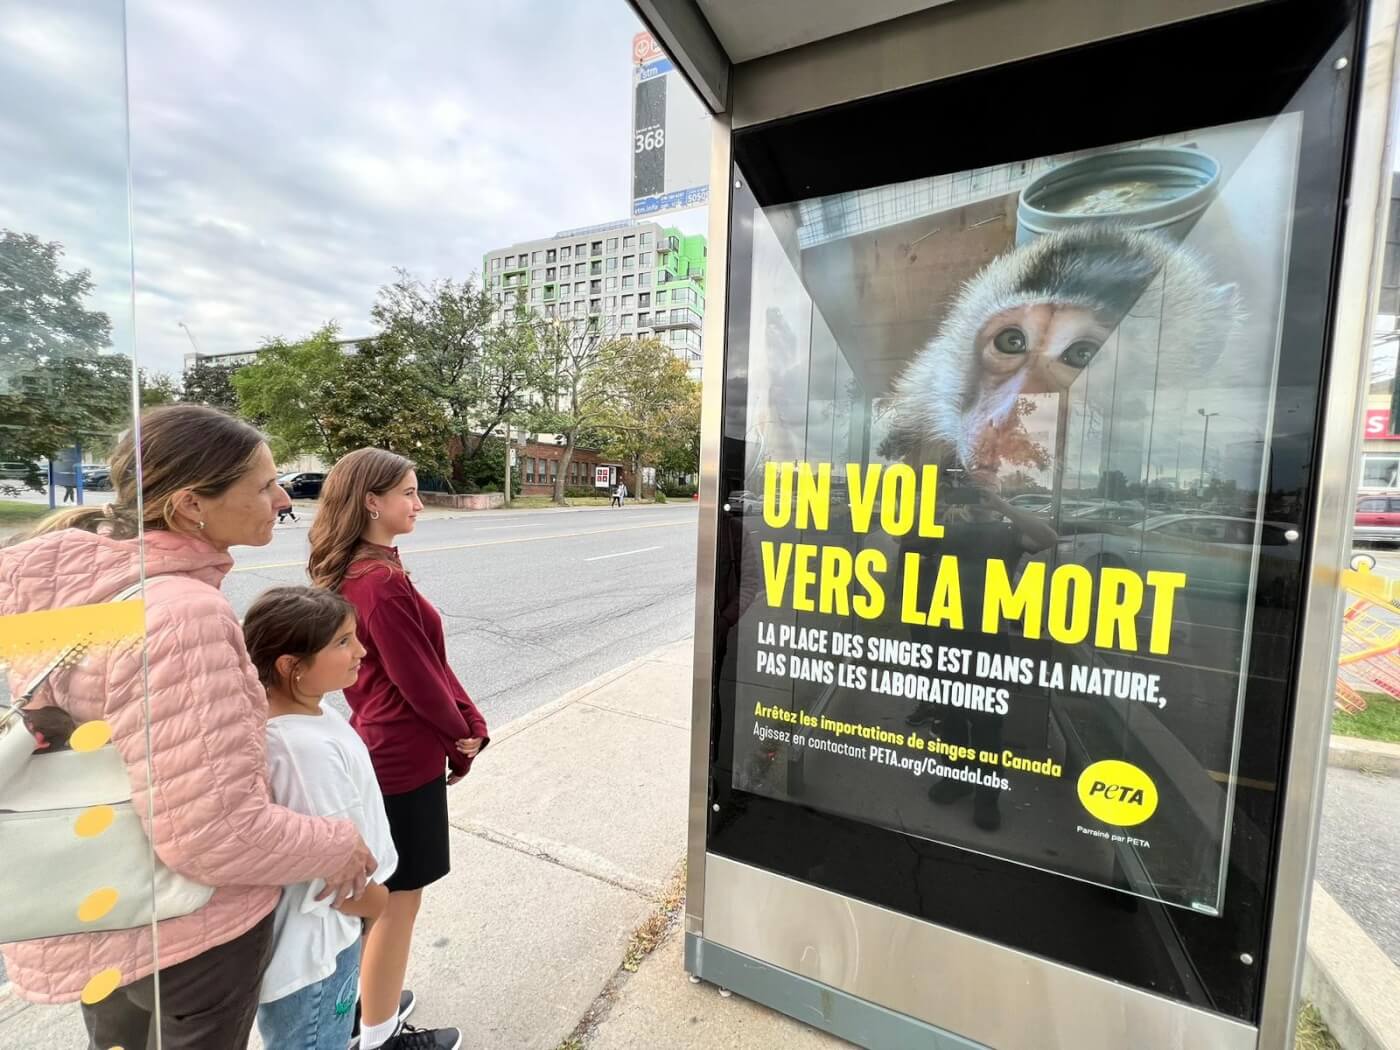 PETA is plastering stark new ads throughout Montréal calling out Canadian officials for enabling the deadly Cambodian monkey-importation industry